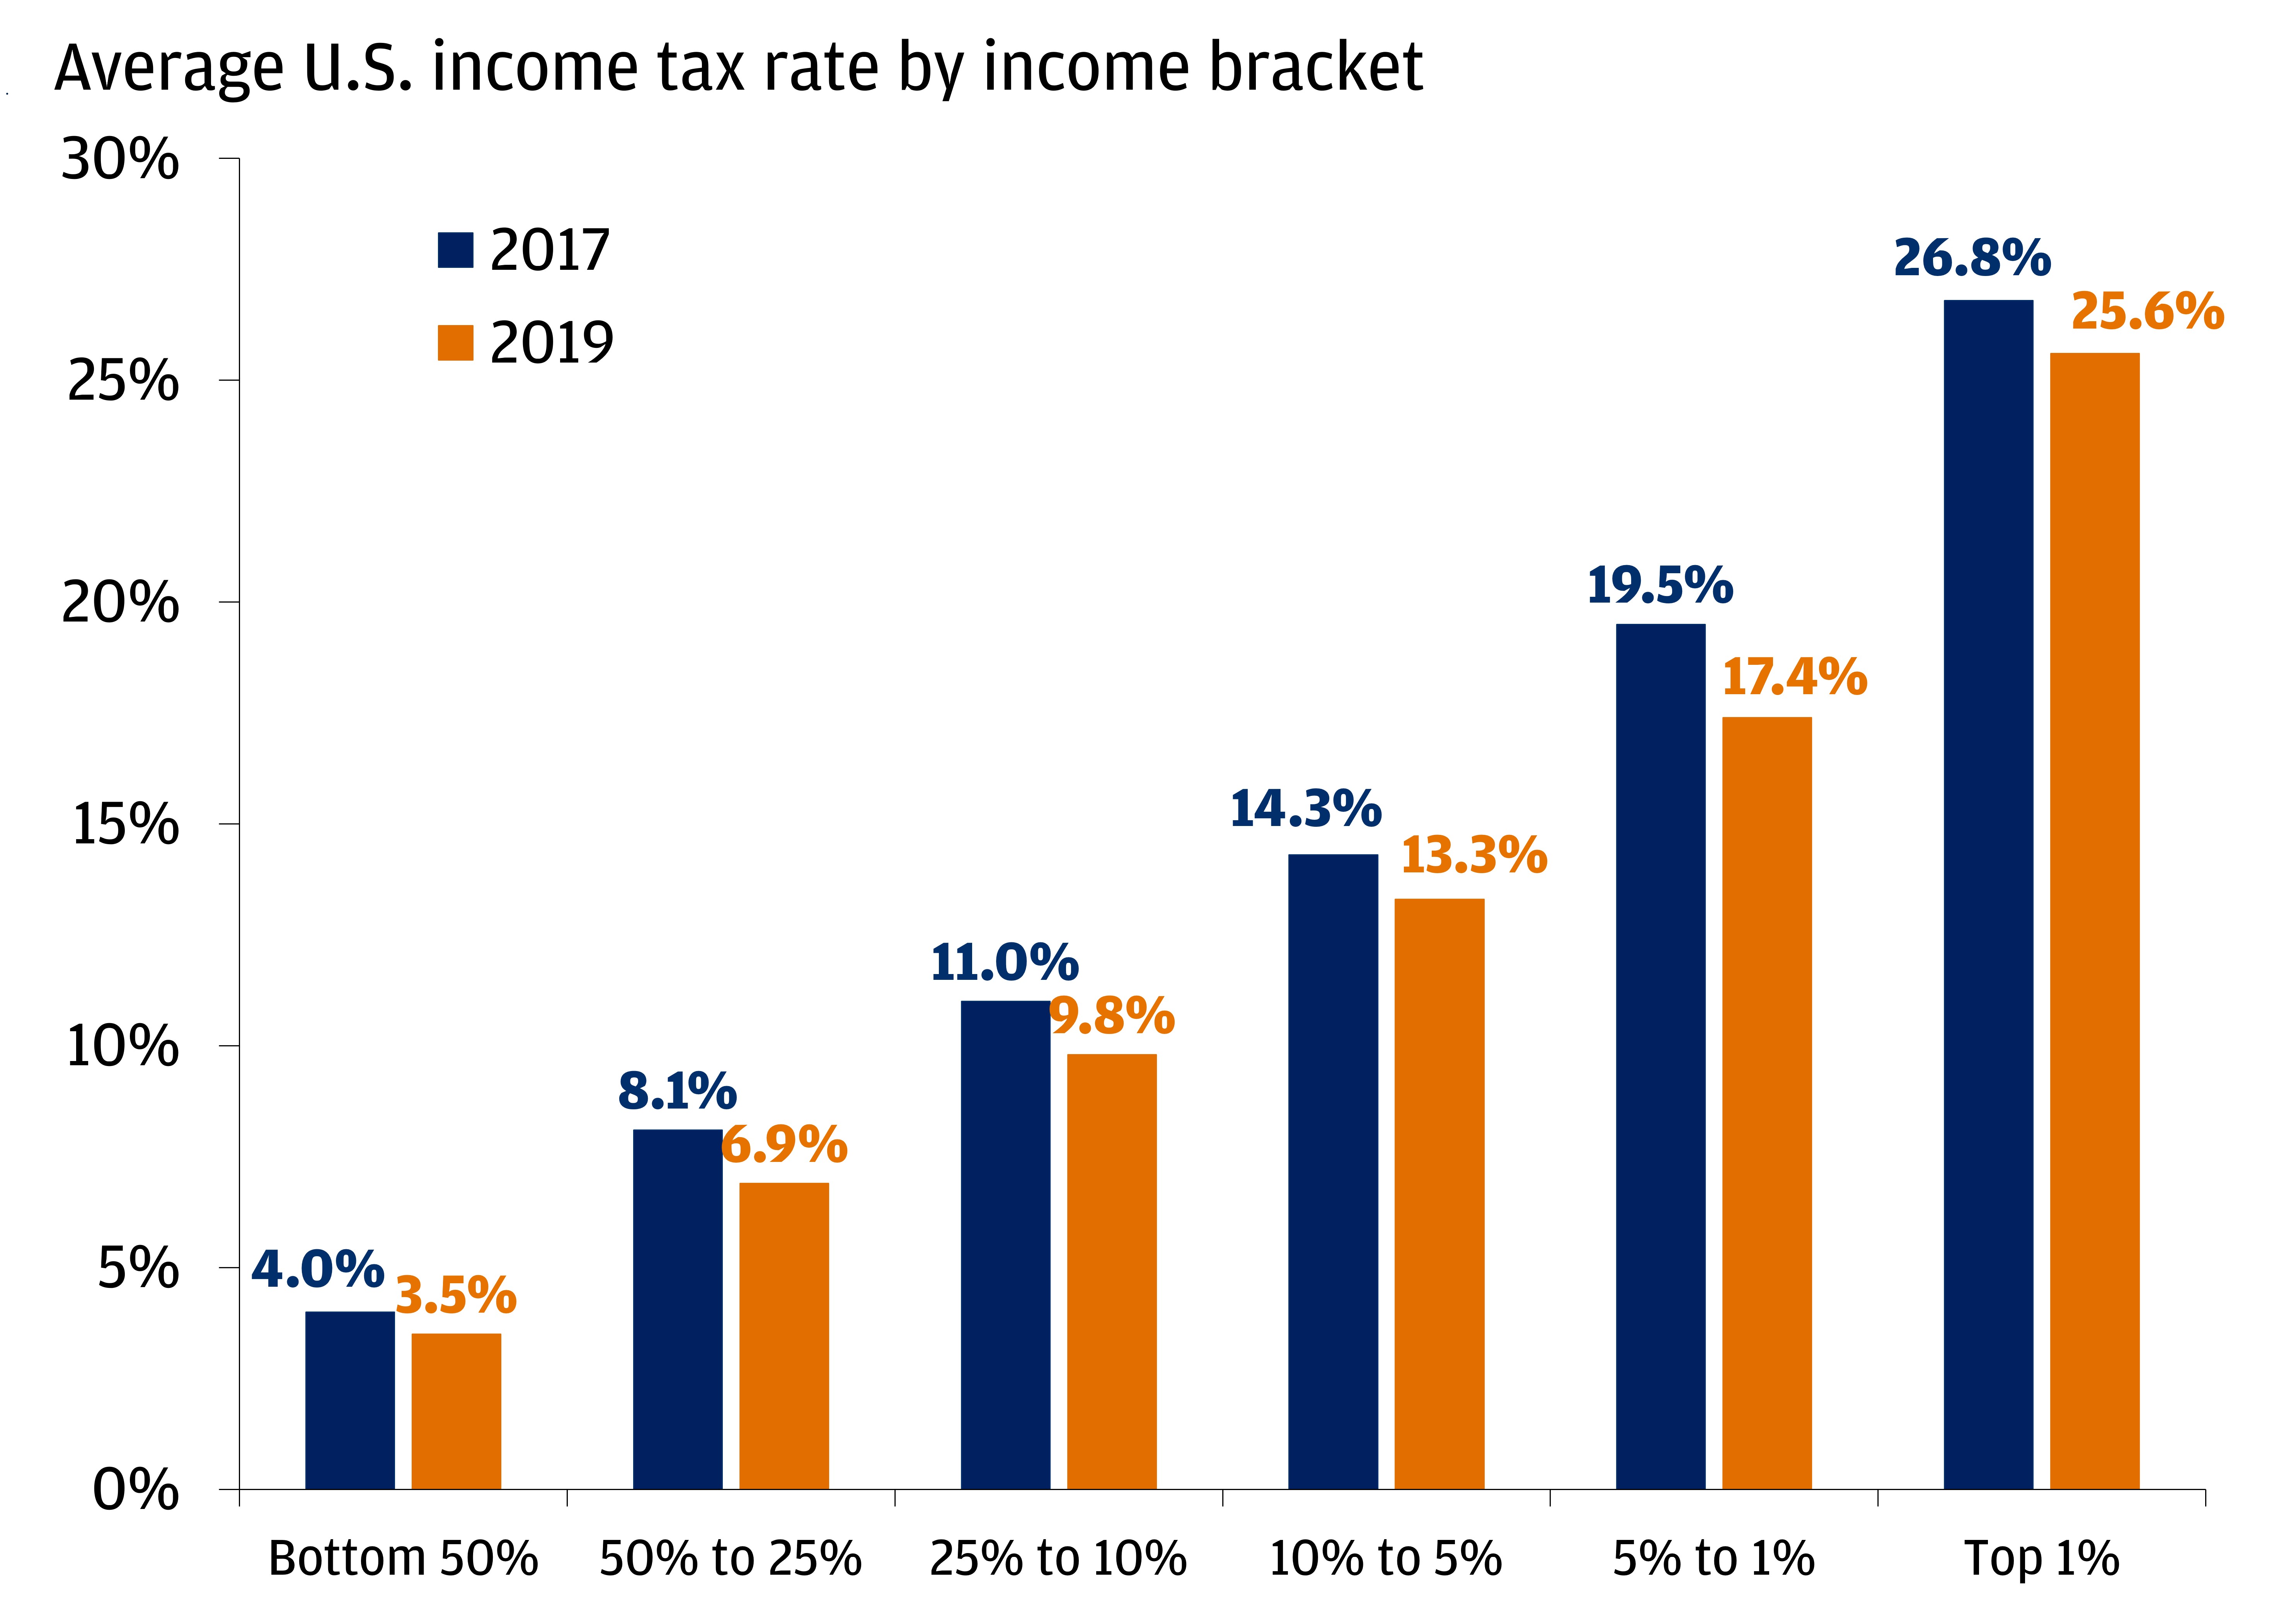 This bar chart shows the average U.S. income rate by income bracket in 2017 and 2019. 